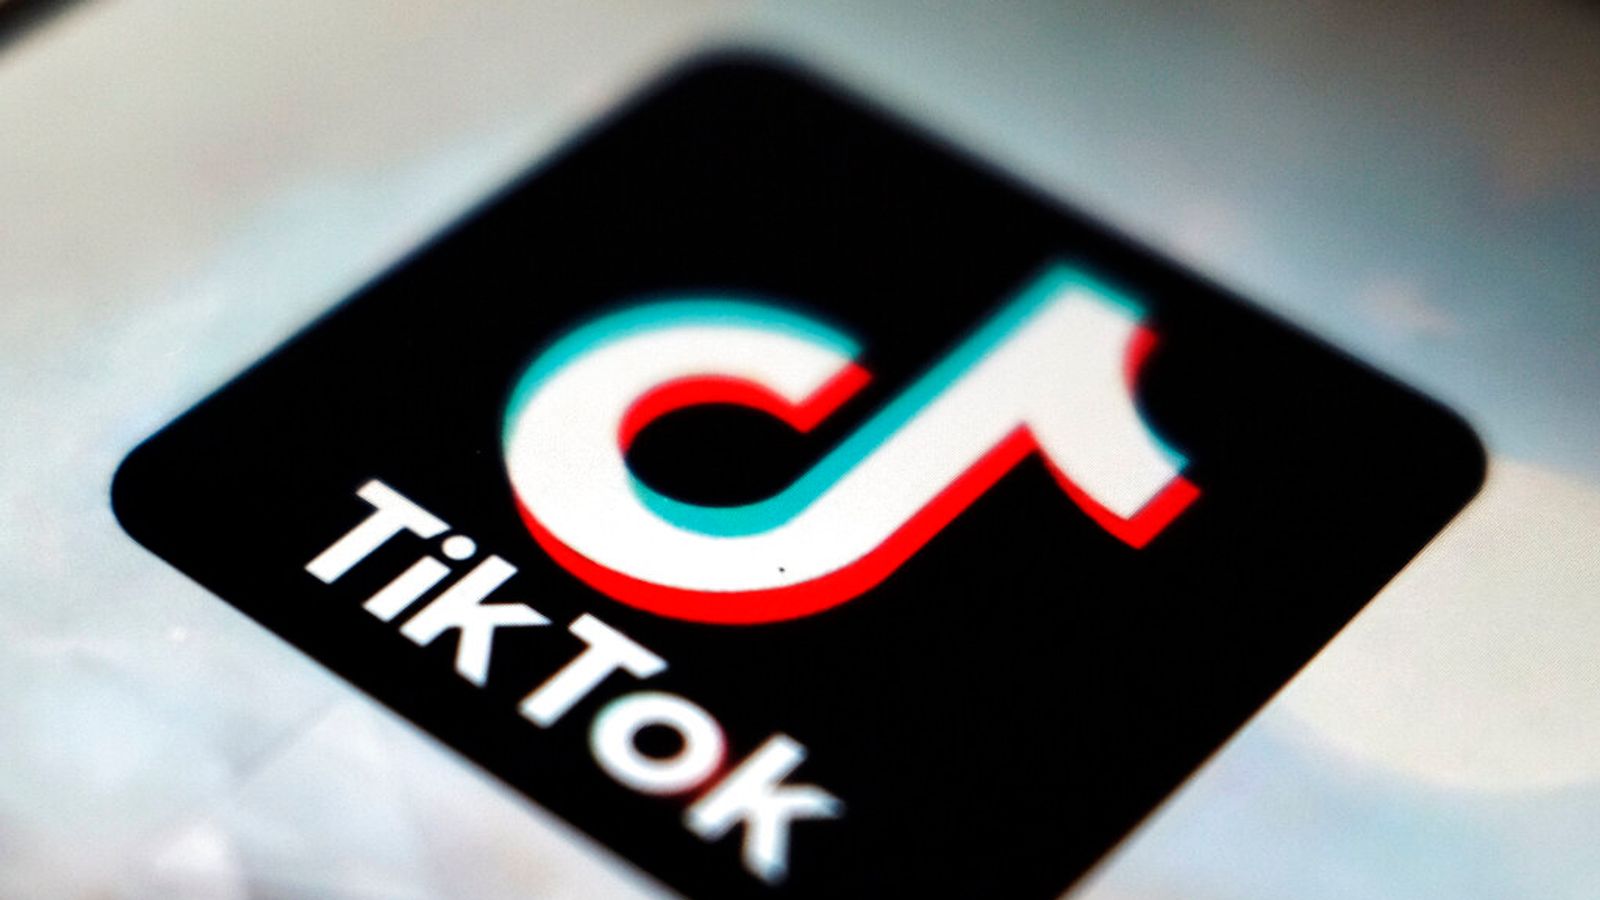 TikTok banned from UK government phones